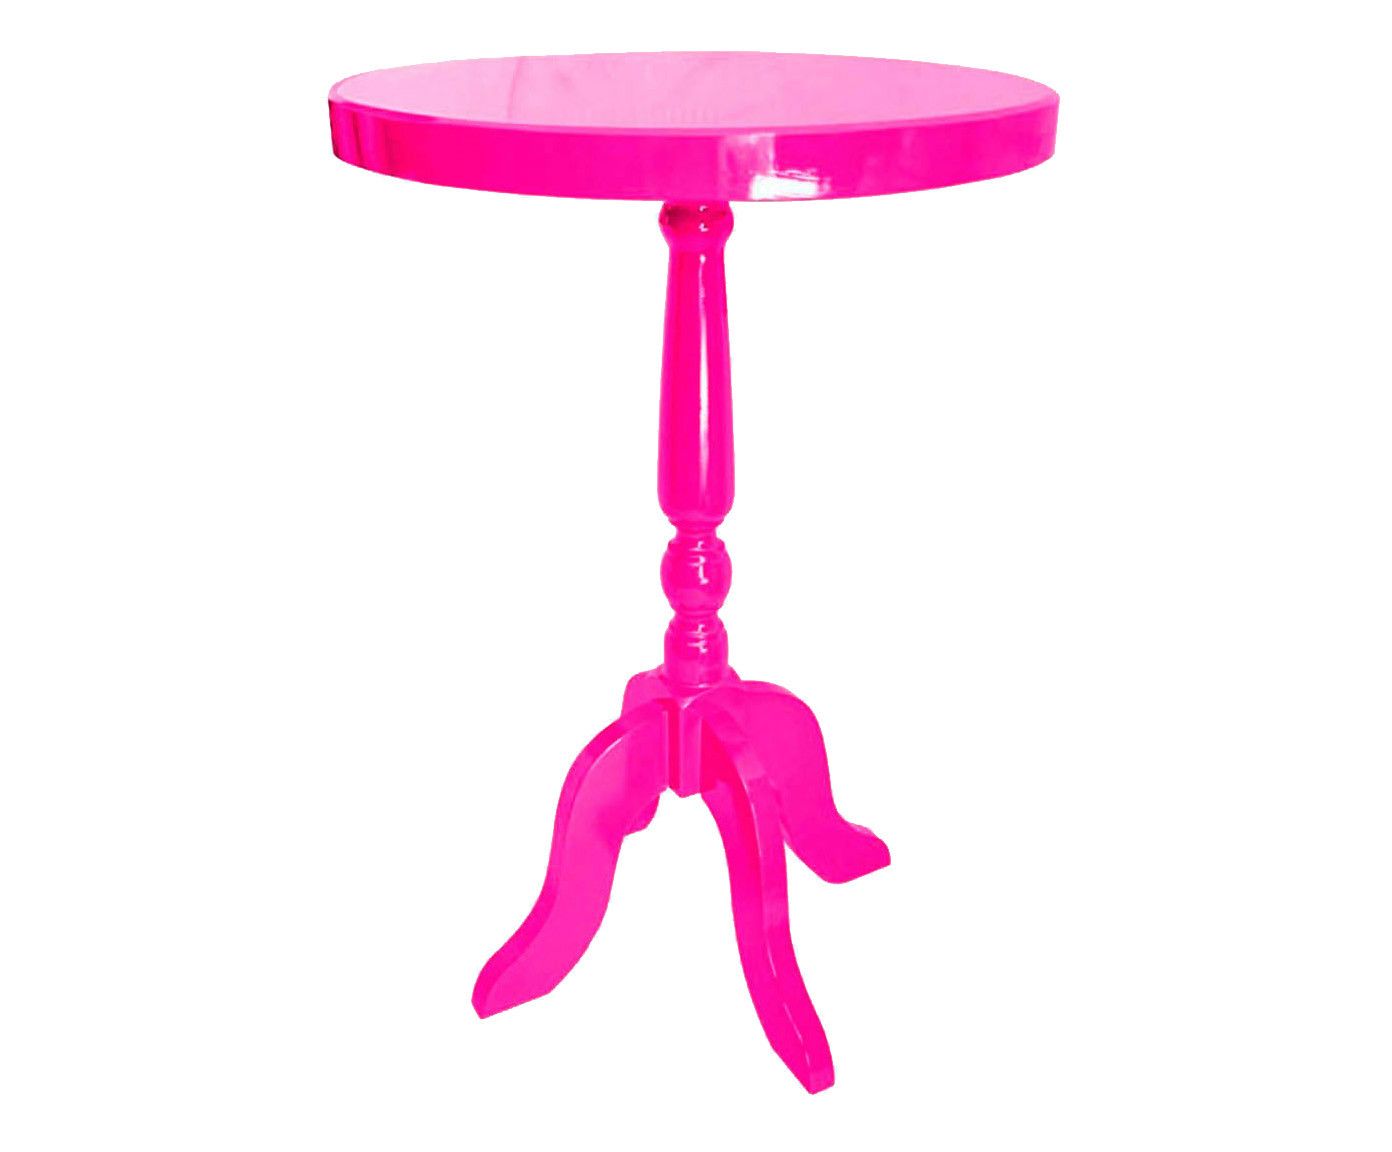 MESA LATERAL CLASSIC CHARM PINK - 50CM | Westwing.com.br